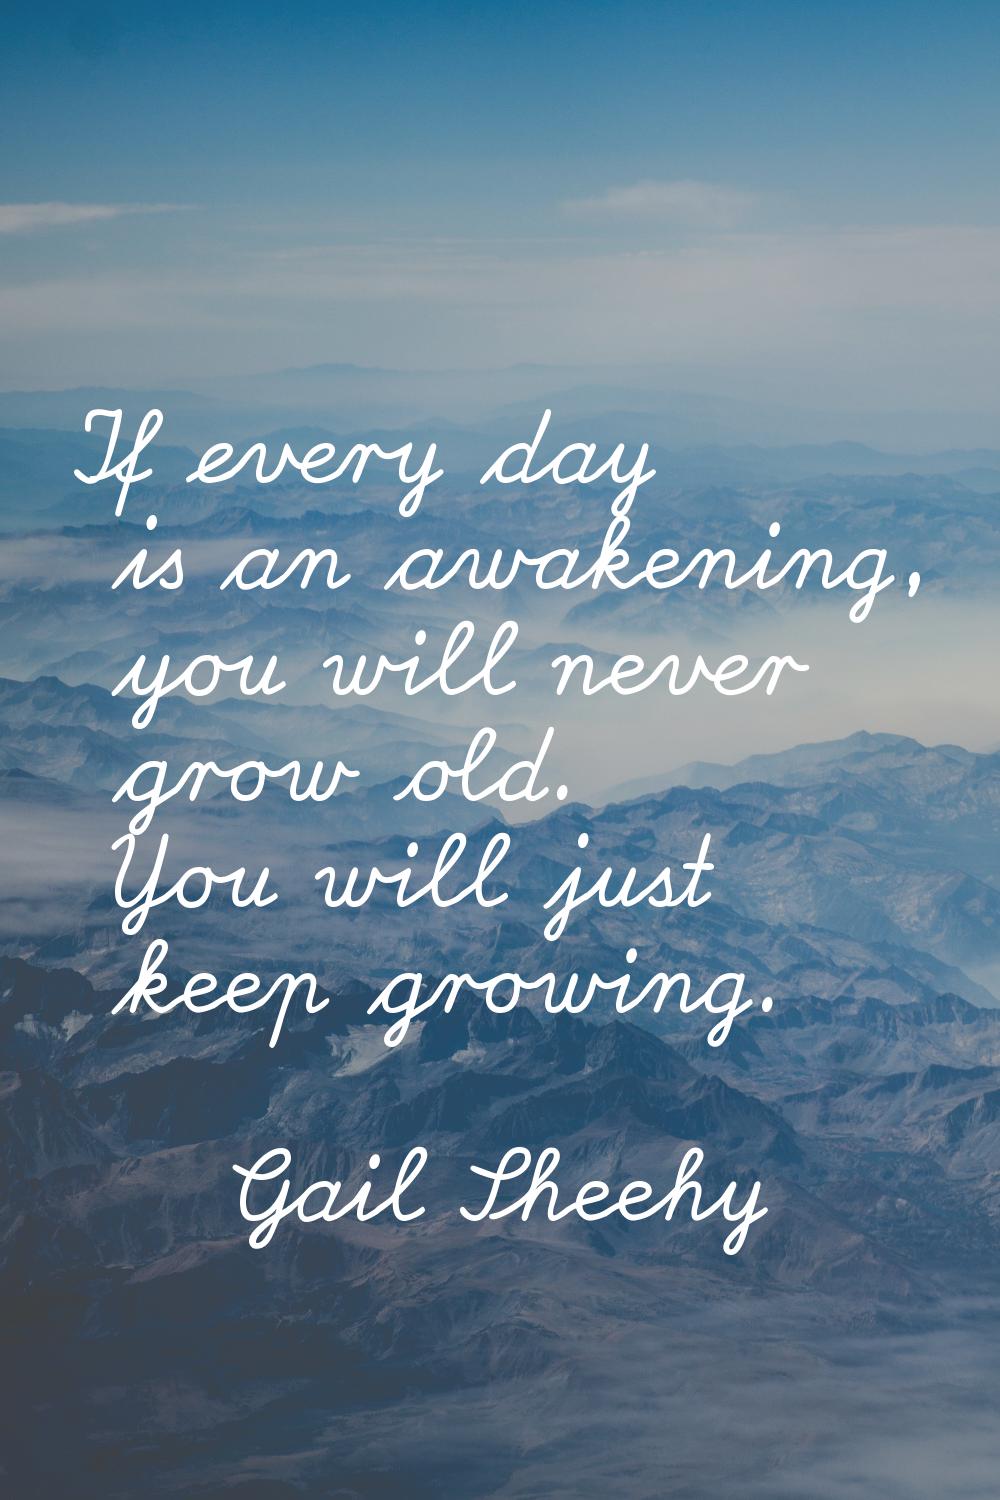 If every day is an awakening, you will never grow old. You will just keep growing.